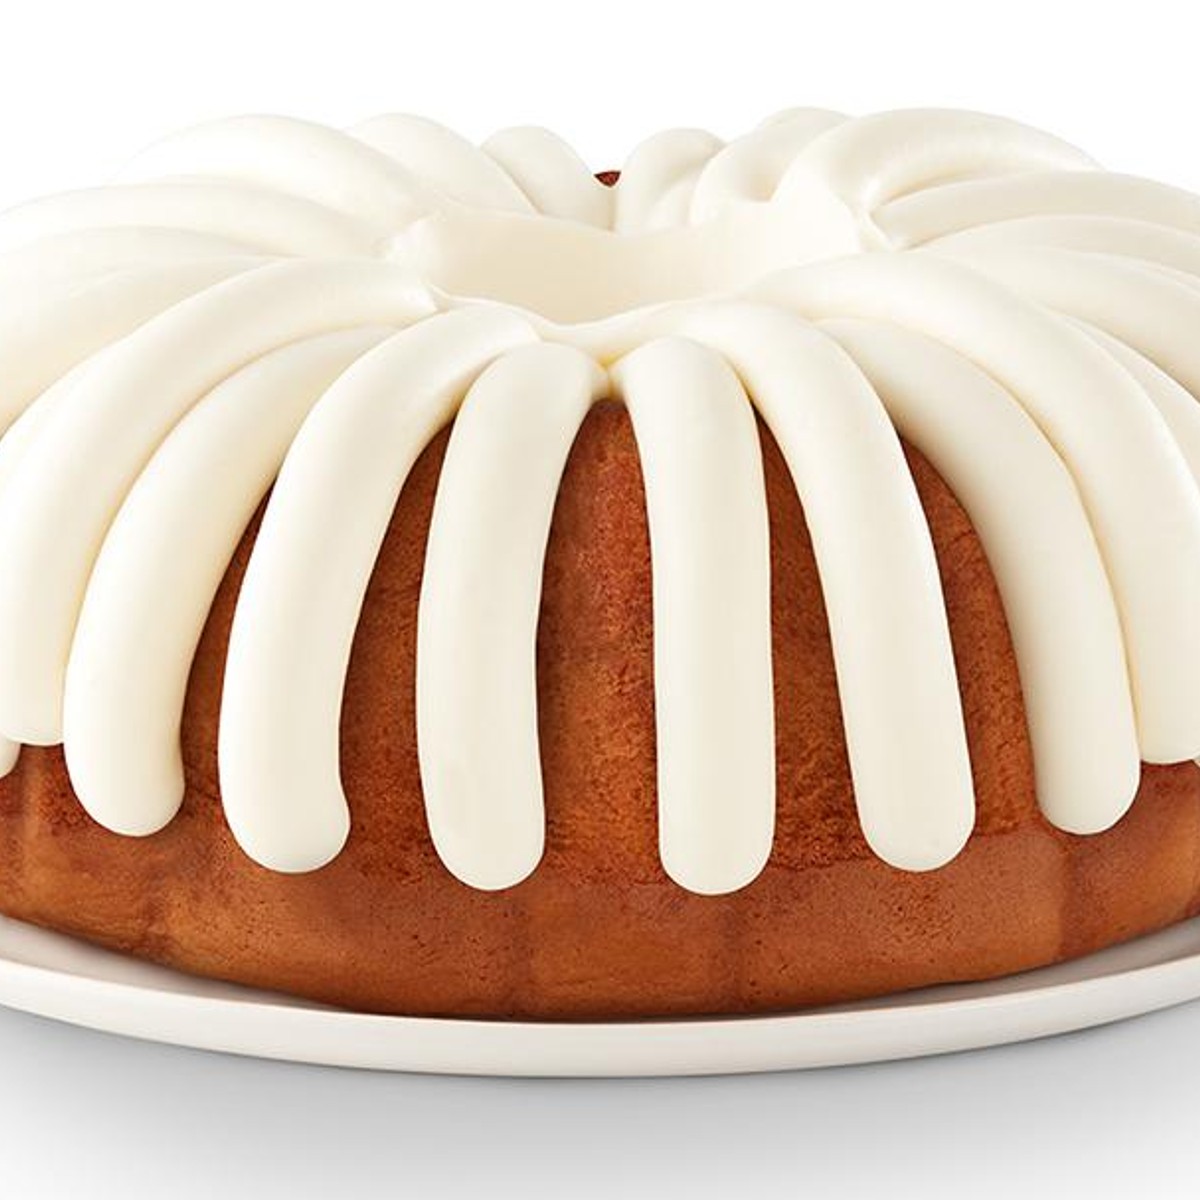 Shop 8 Inch, 10 Inch & Two Tier Bundt Cakes - Nothing Bundt Cakes